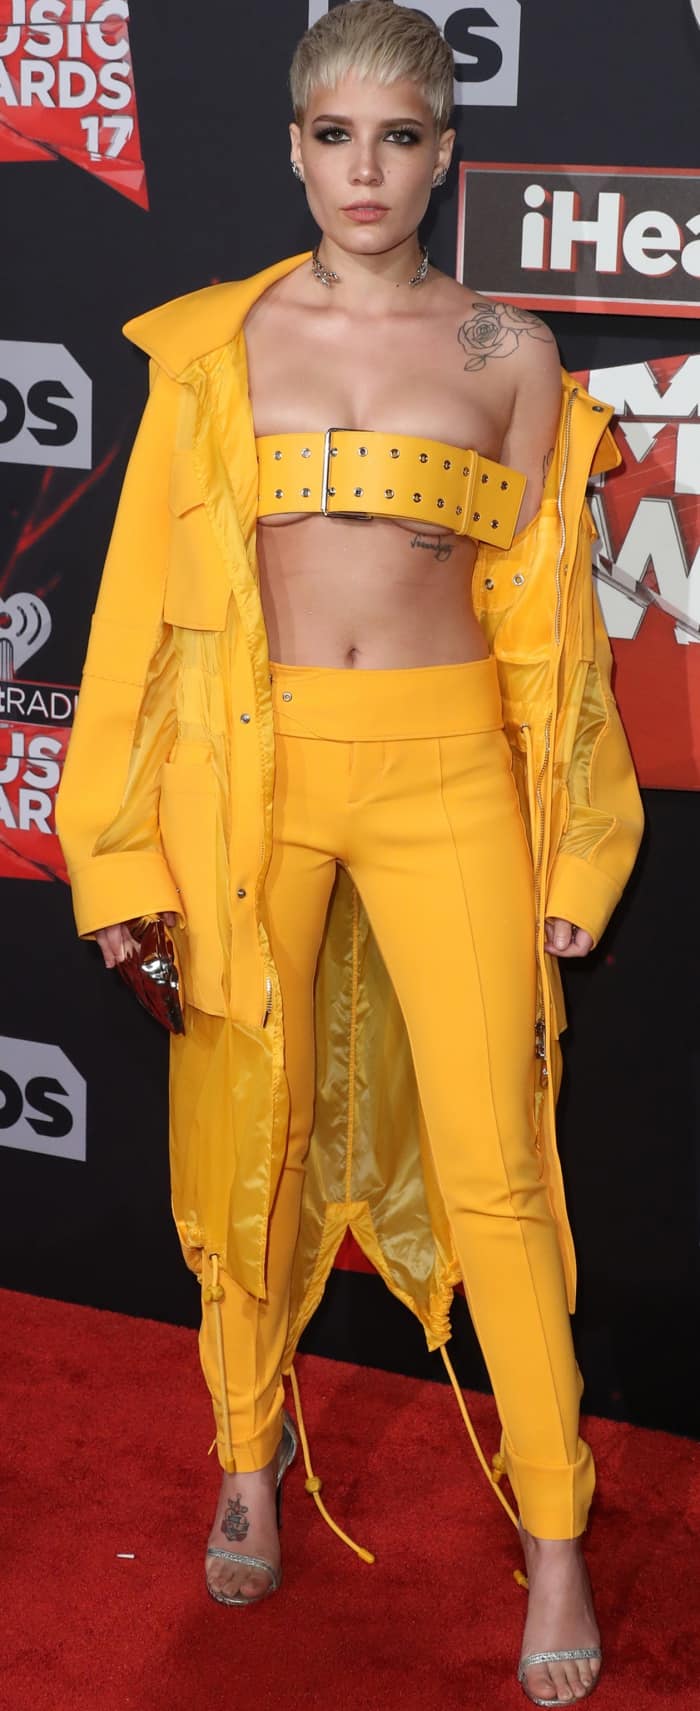 Halsey in a bright yellow Versus Versace outfit at the 2017 iHeartRadio Music Awards